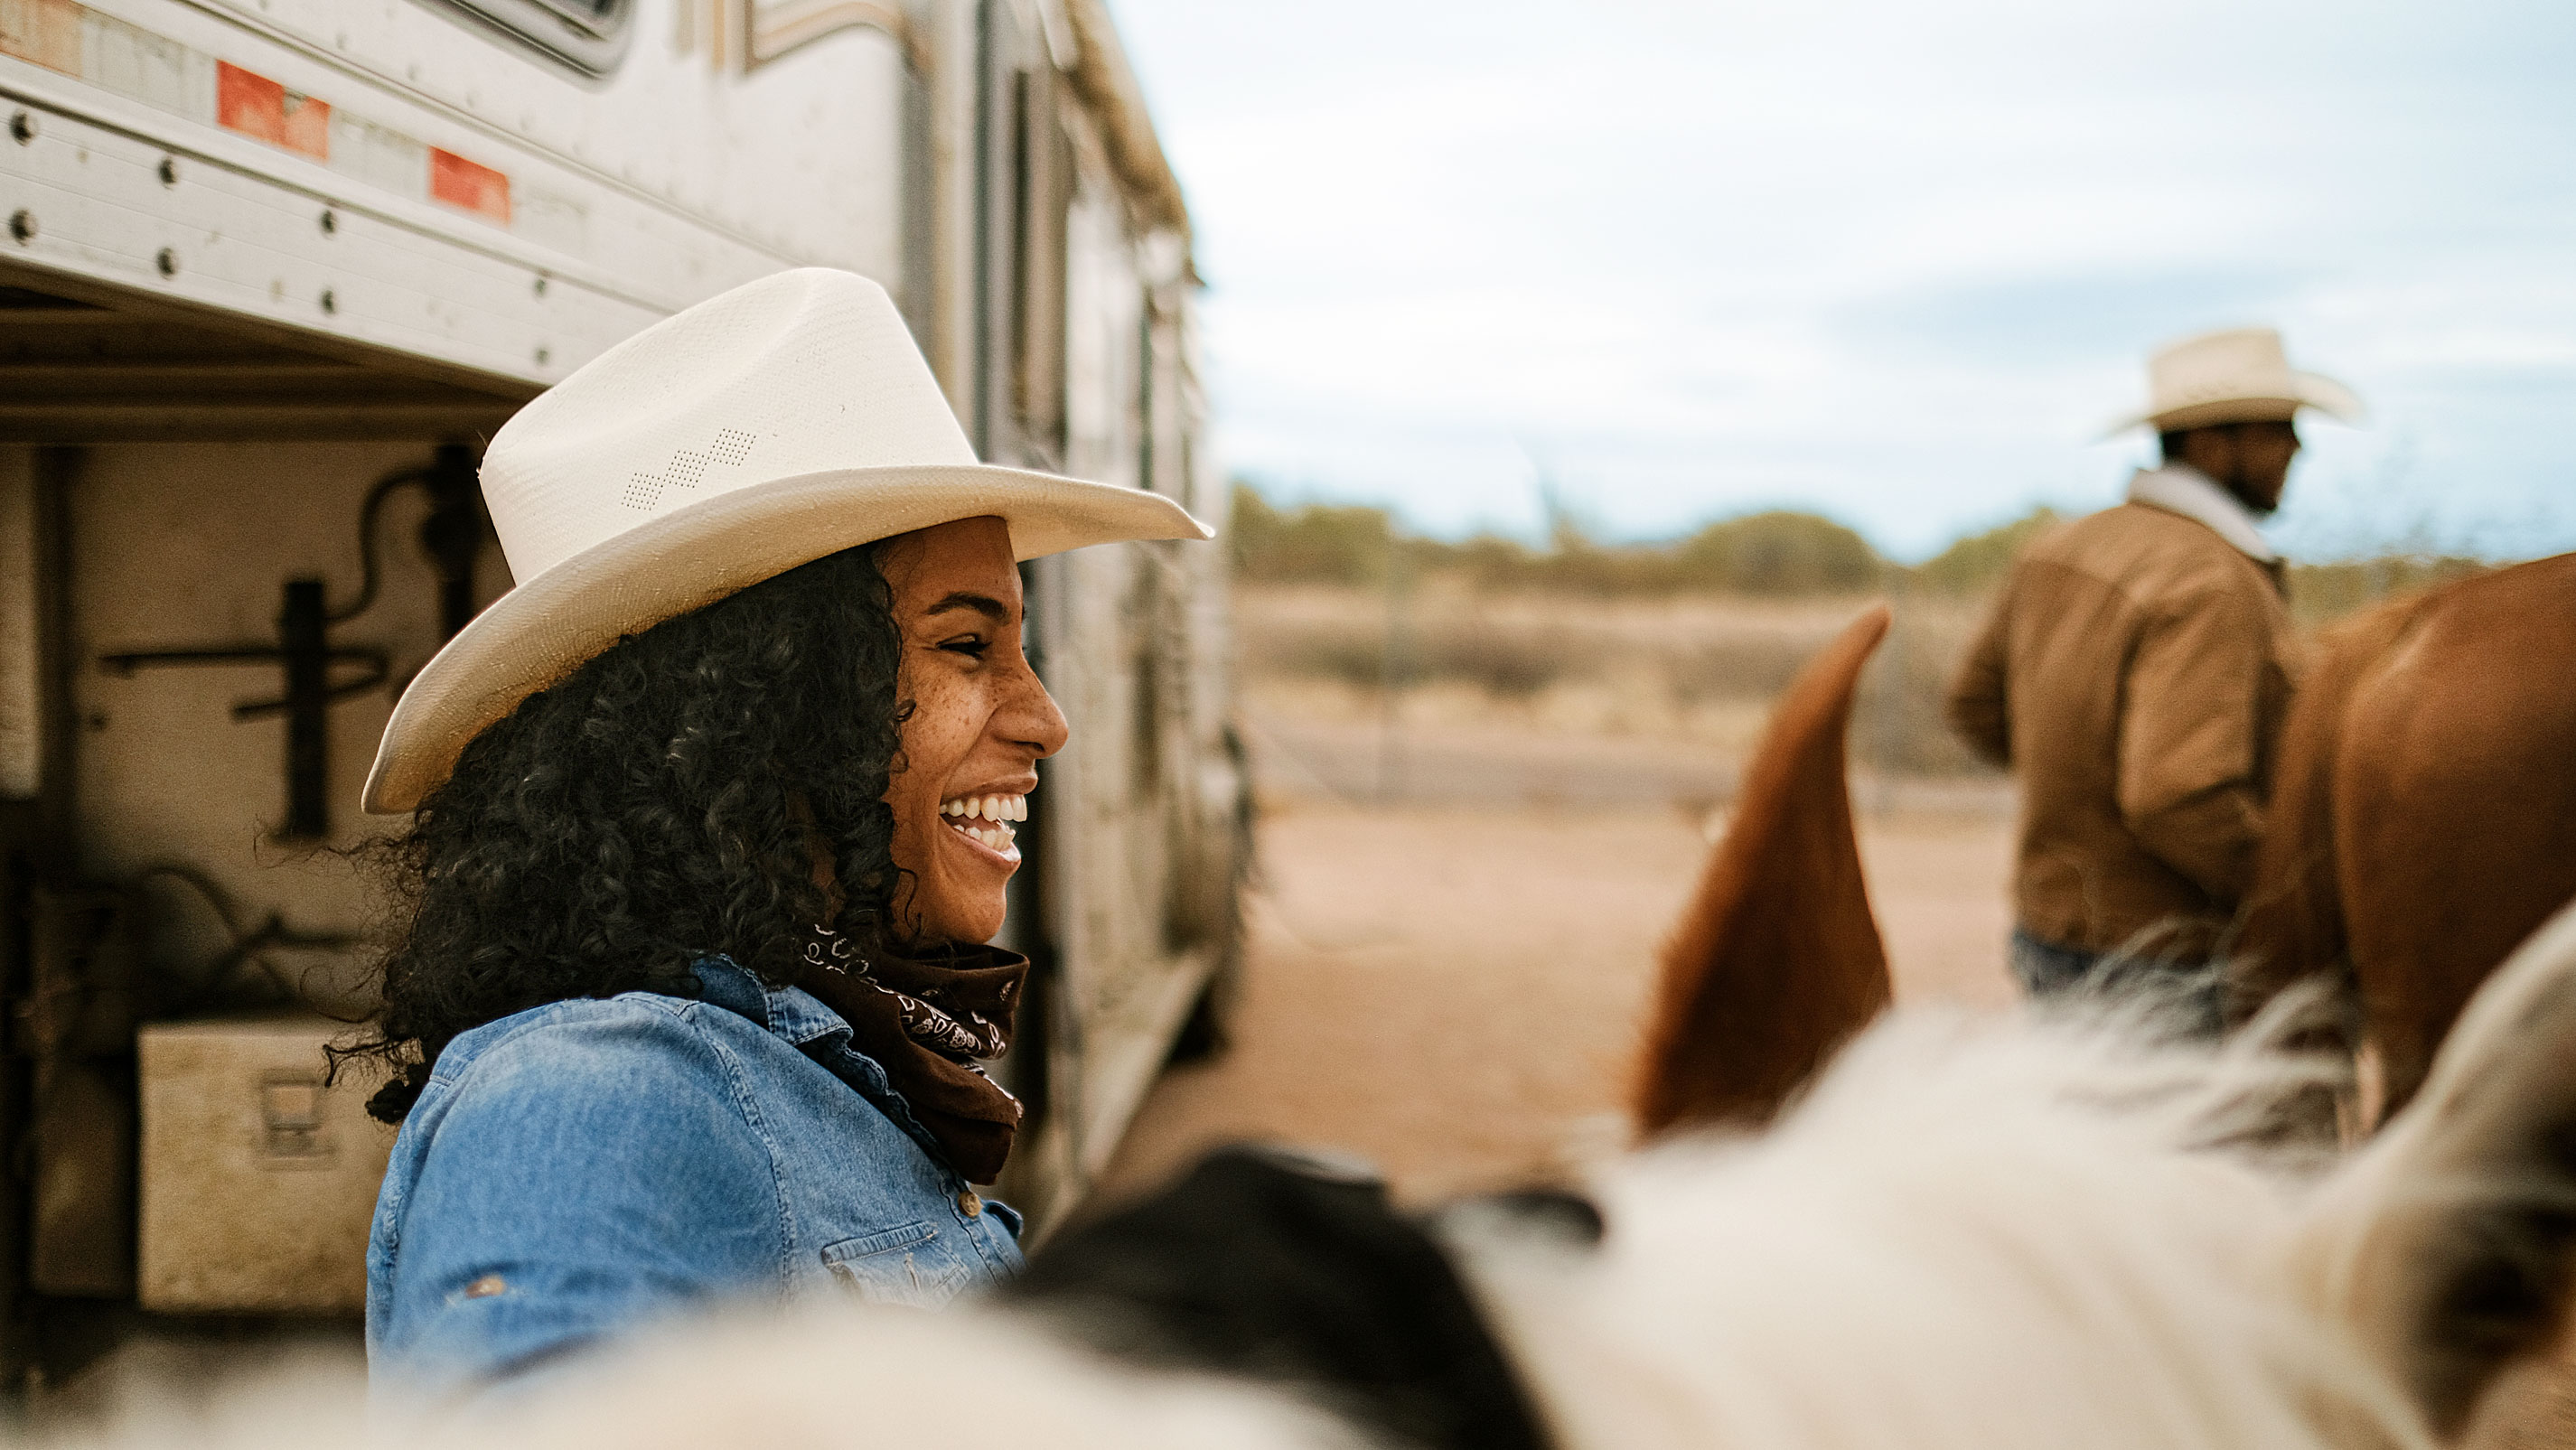 A cowgirl smiling next to horses